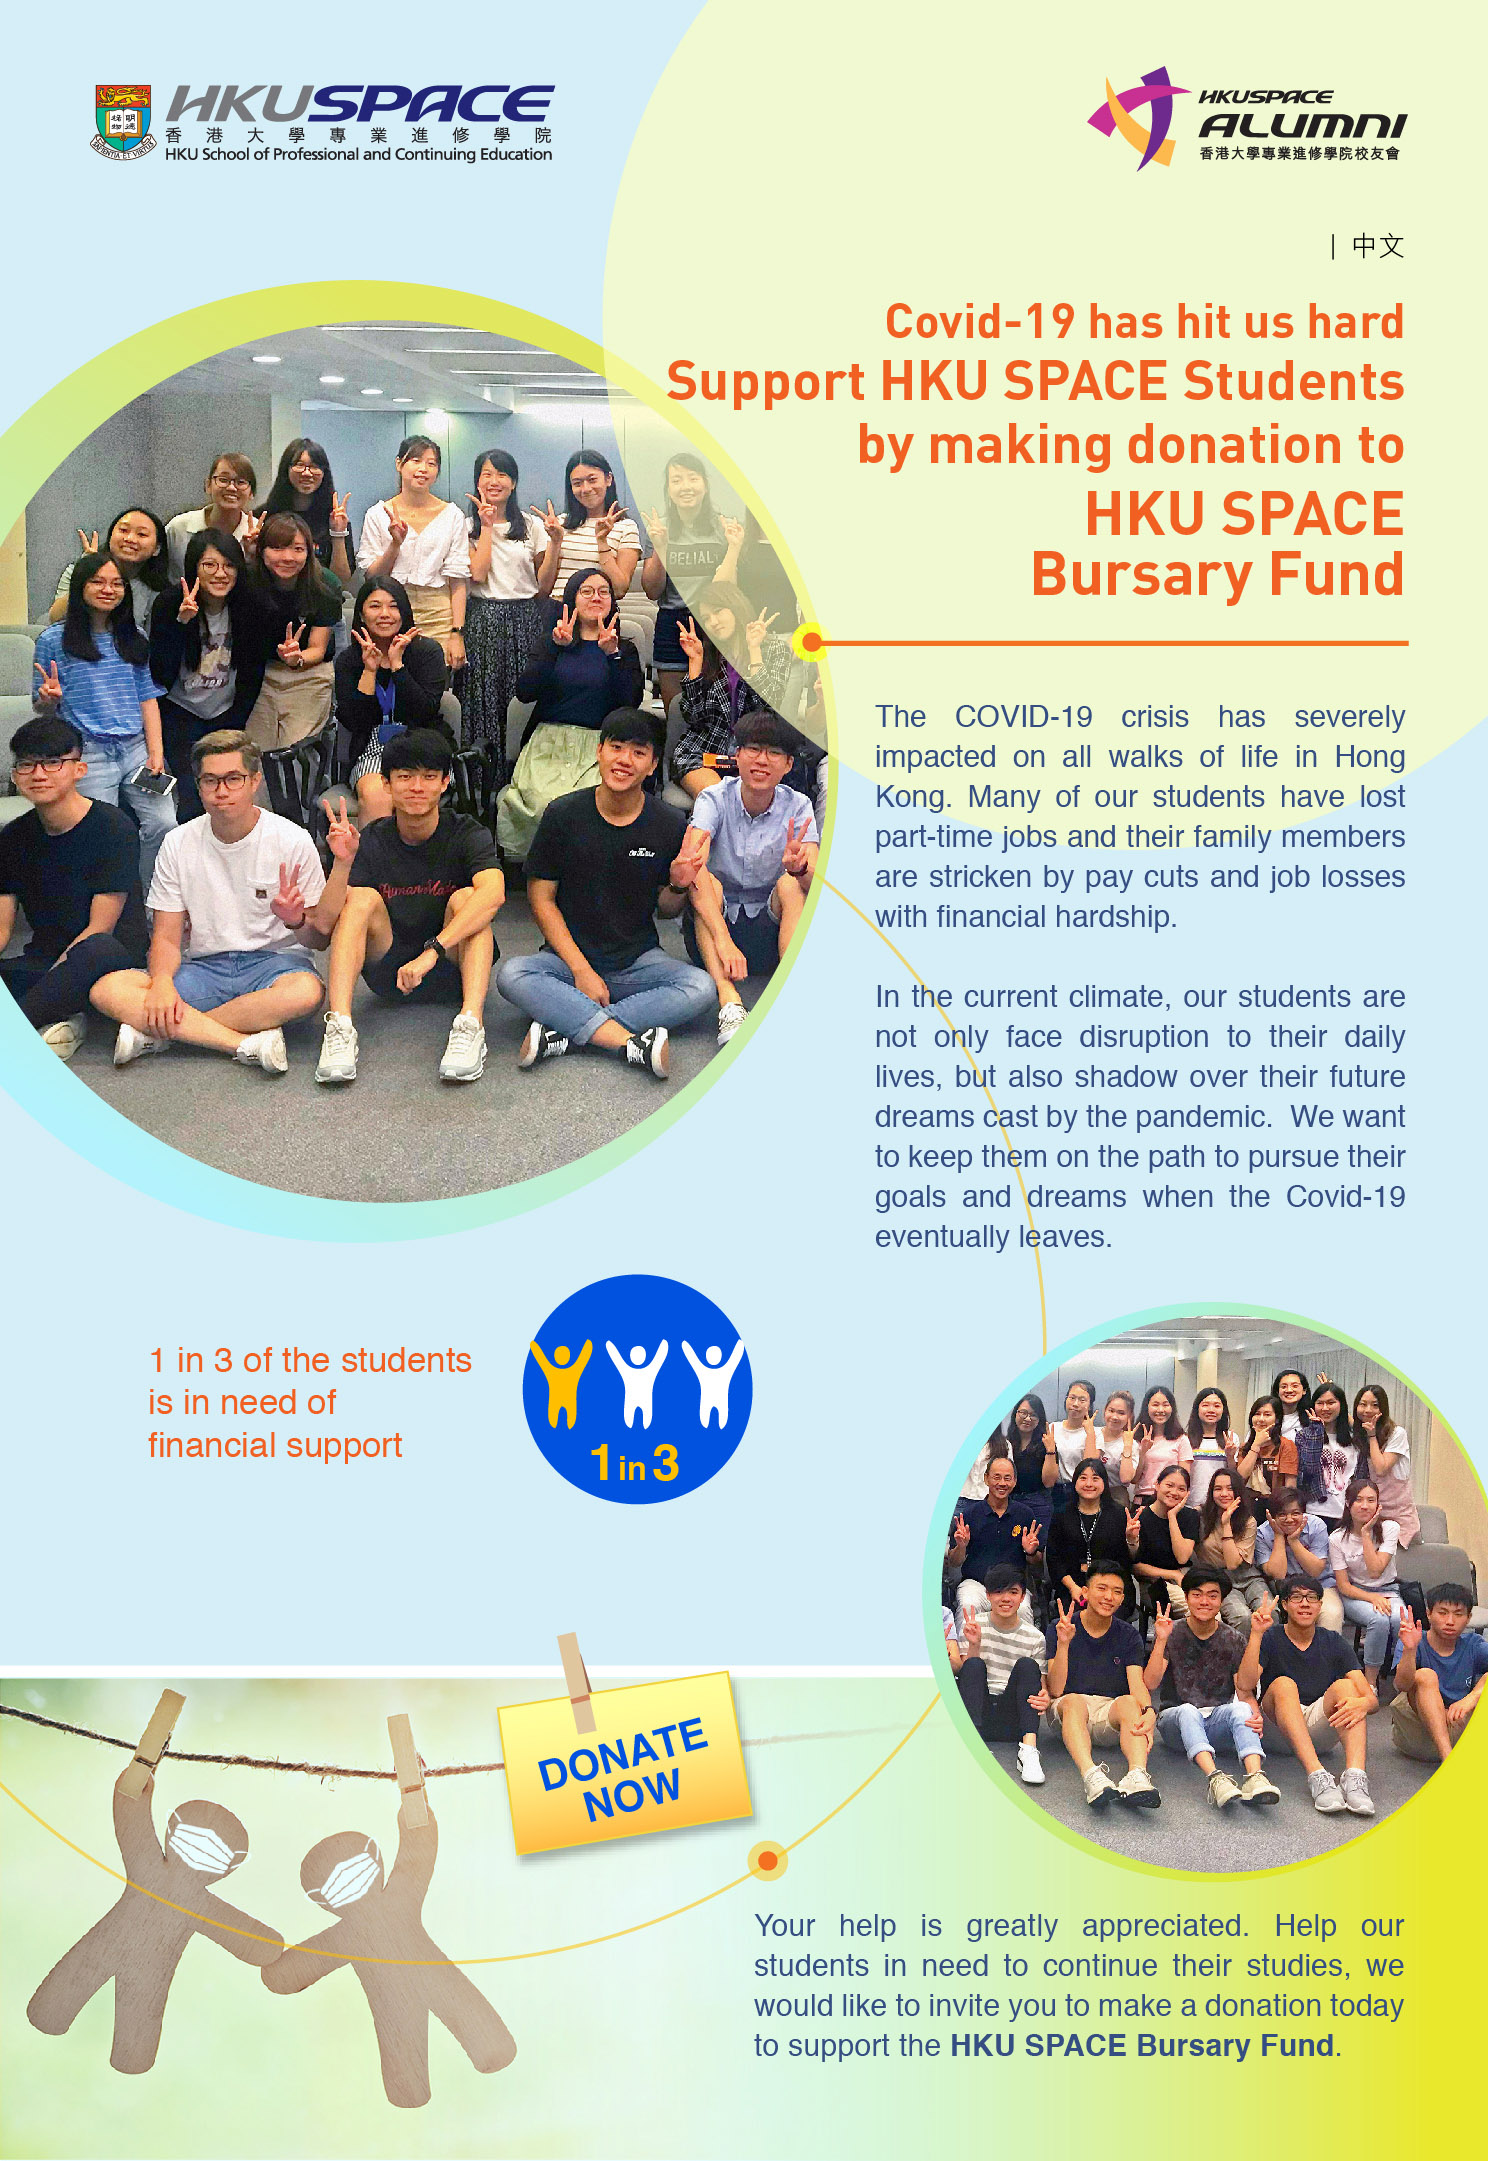 Covid-19 has hit us hard. Support HKU SPACE Students by making donation to HKU SPACE Bursary Fund